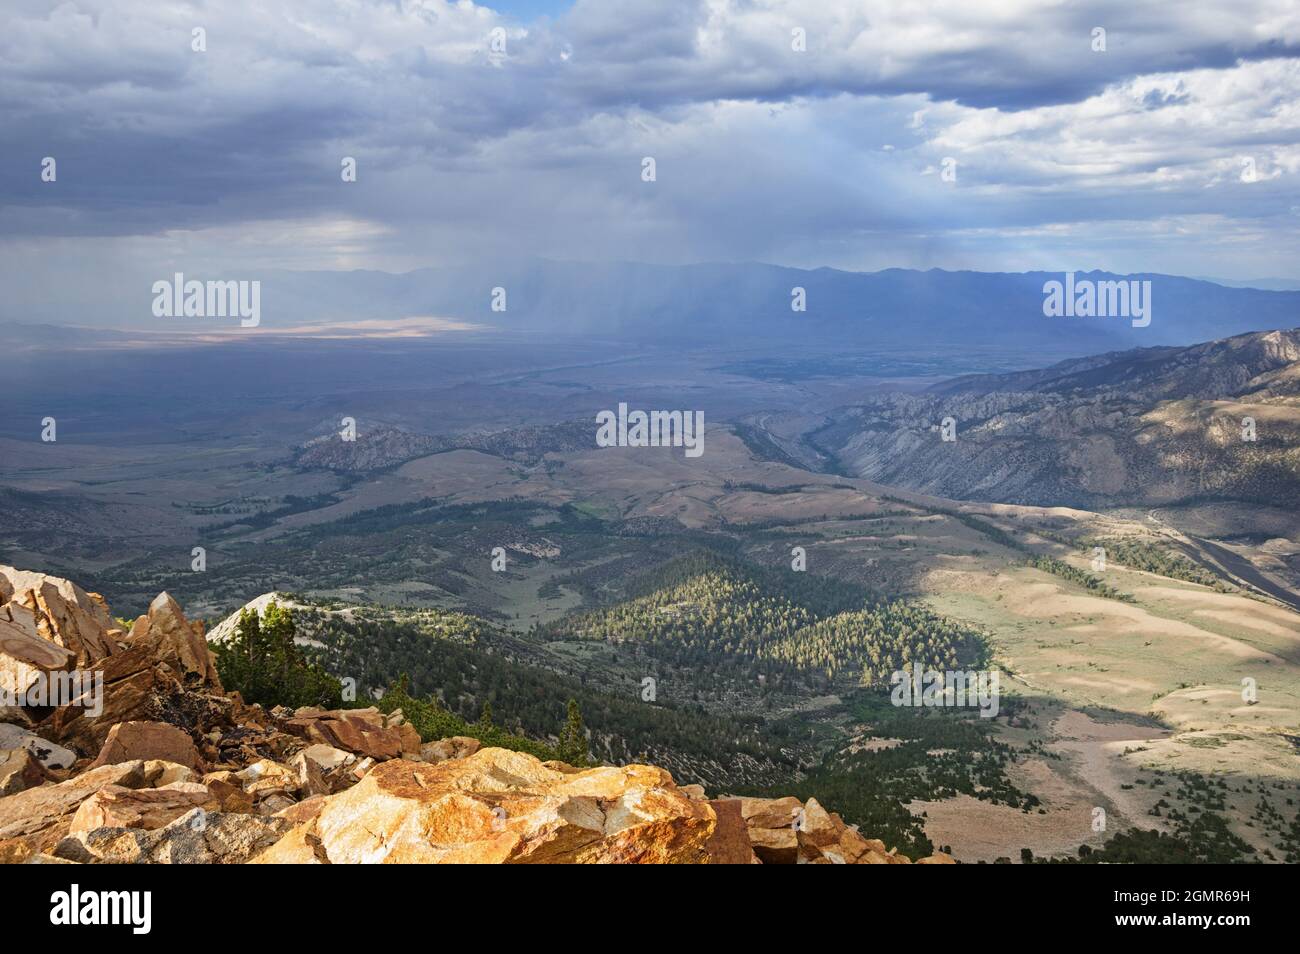 summer shower over Bishop California in the Owens Valley seen from Bishop Bowl Peak Stock Photo